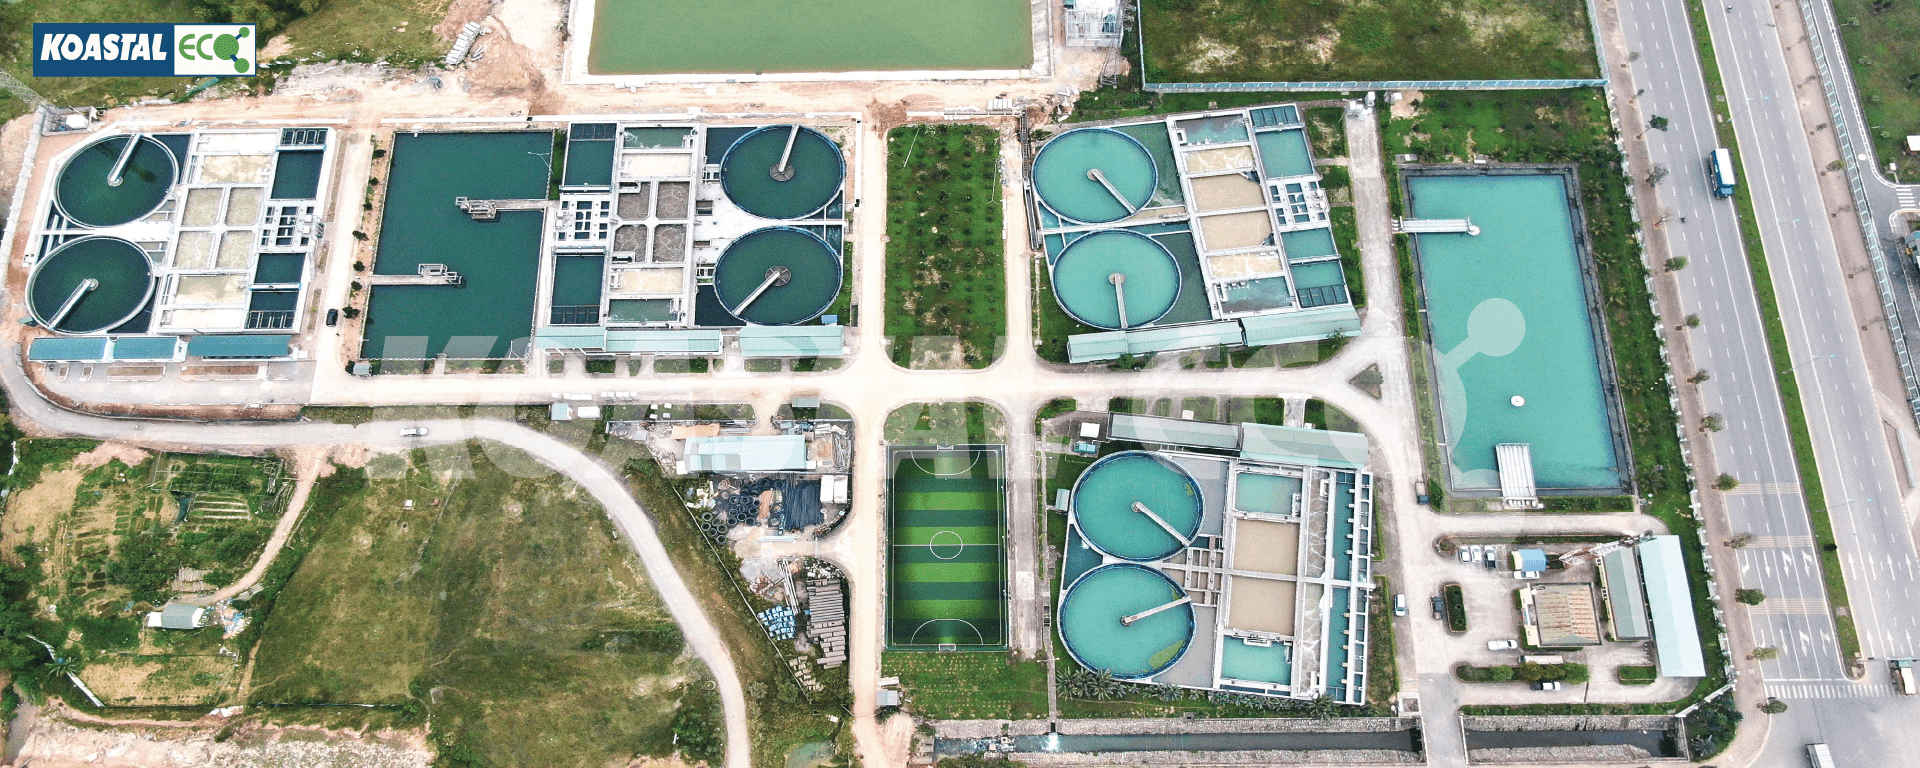 The centralized wastewater treatment plant of Yen Binh Urban, Service, and Industrial Park